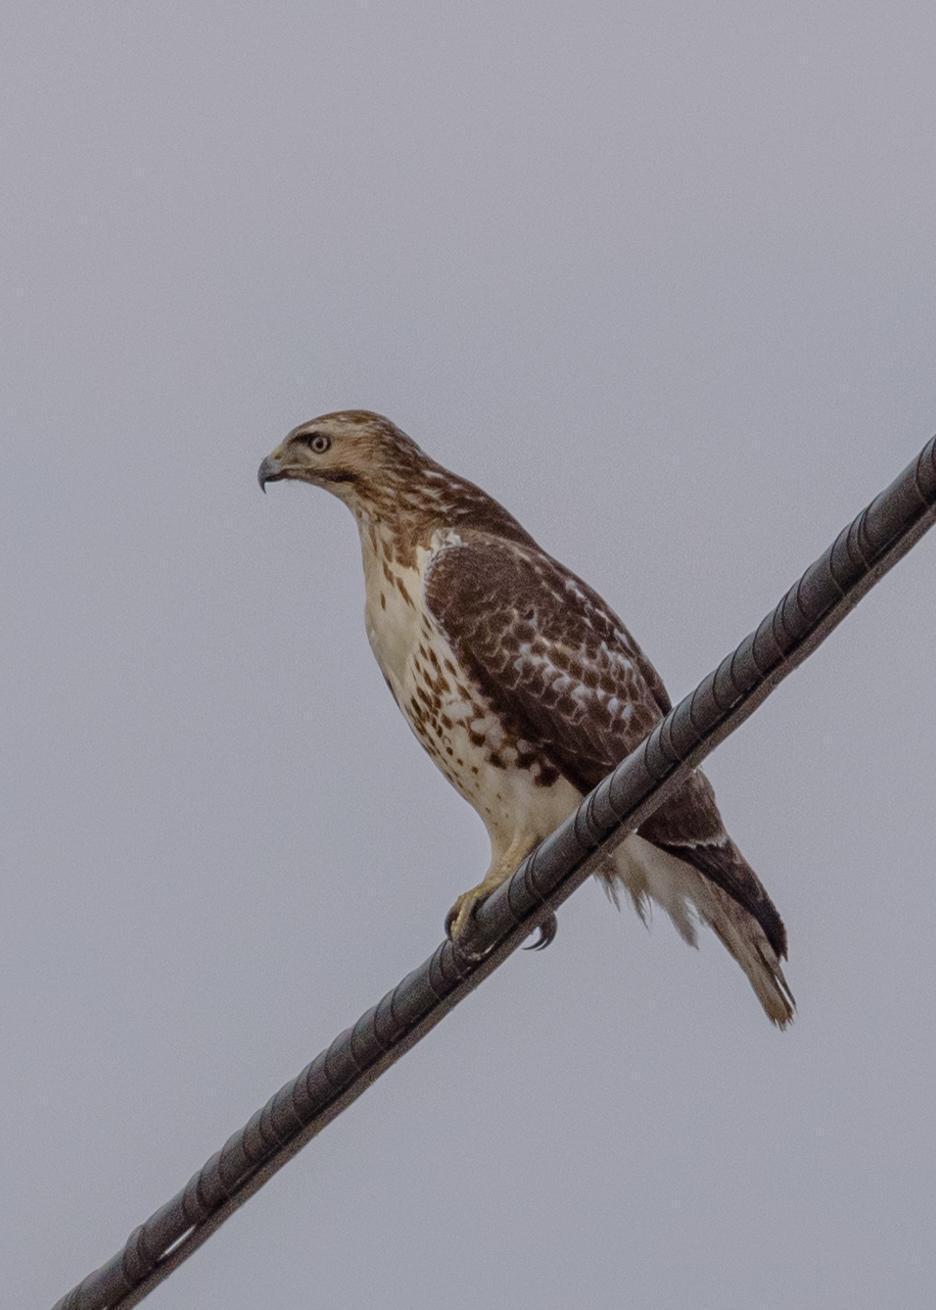 Red-tailed Hawk Photo by Keshava Mysore